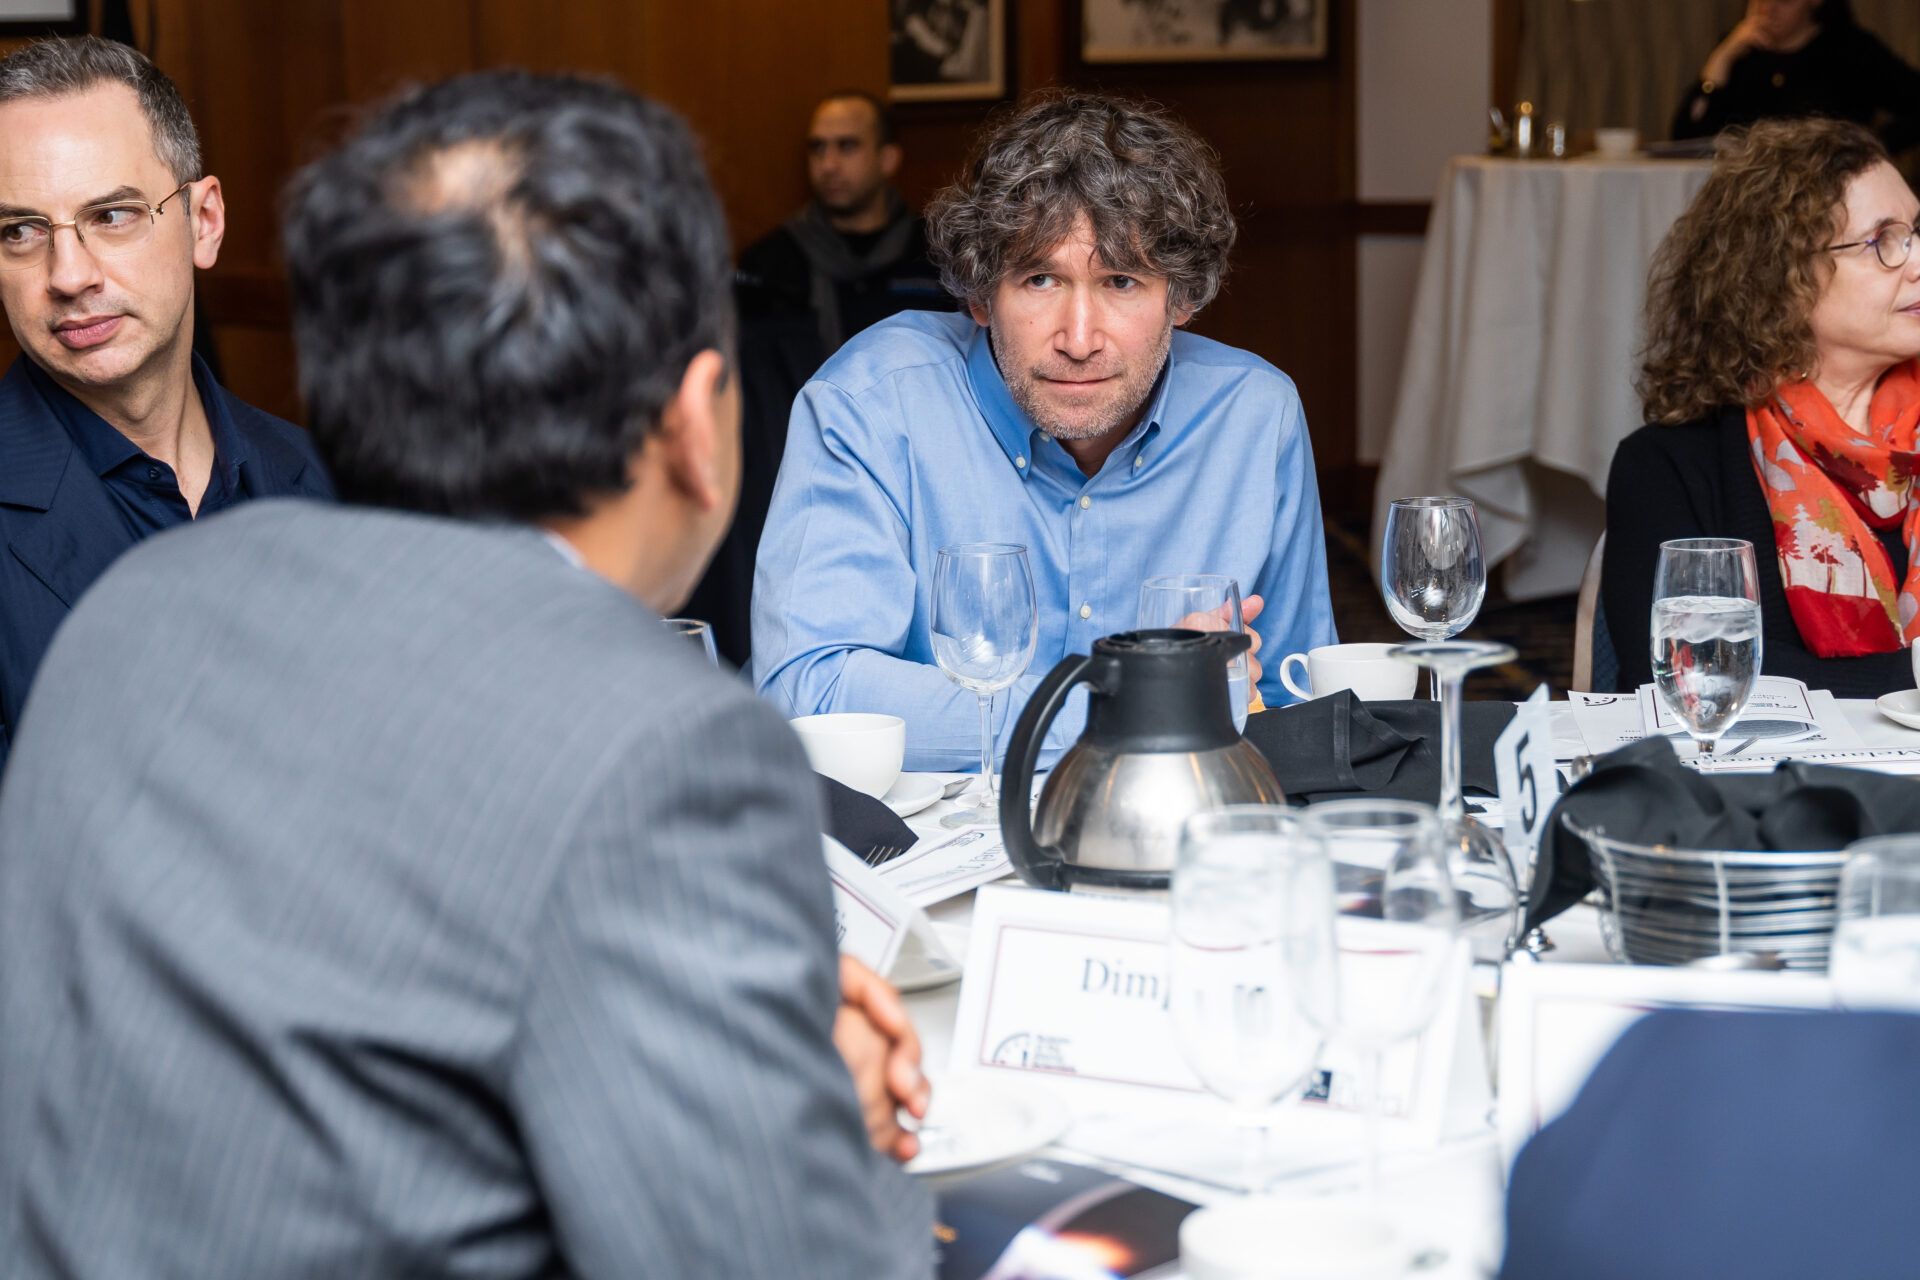 Daniel Holz attends the Doomsday Clock Leadership Luncheon following the 2023 Doomsday Clock announcement.